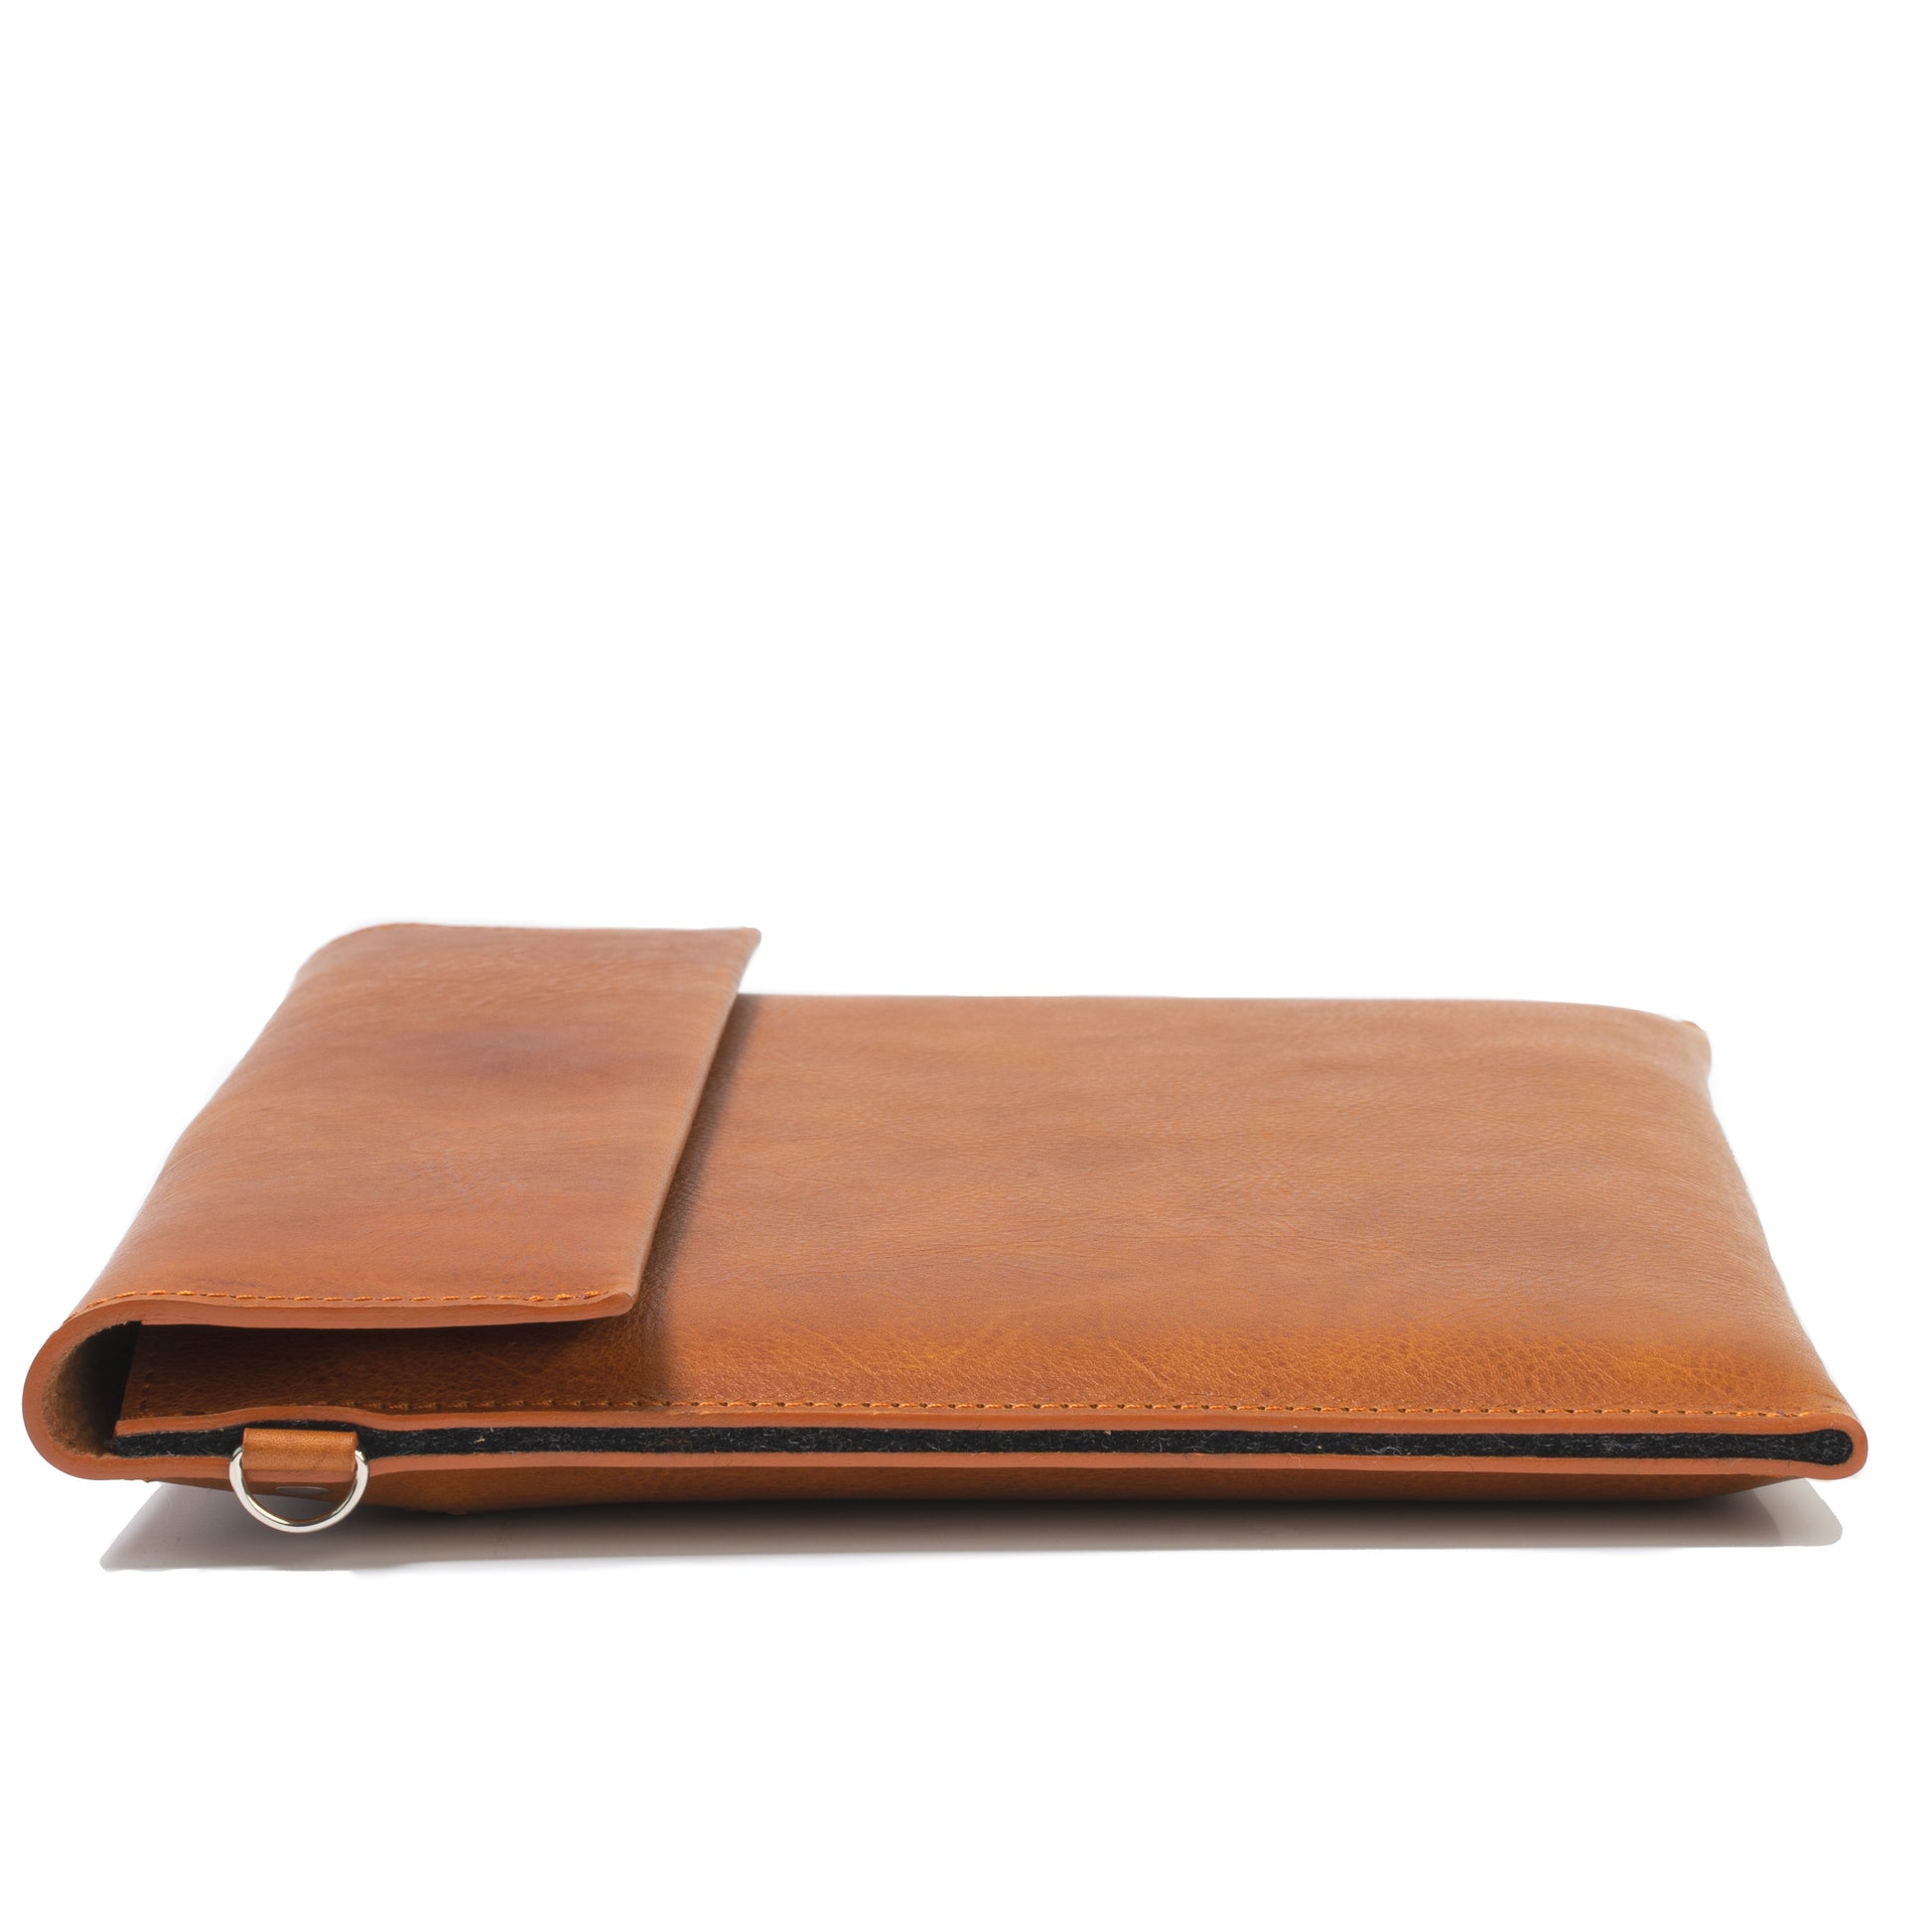 Best man sleeve case bag for iPad 12.9 with keyboard in cognac brown tan color with adjustable strap made from premium Italian leather